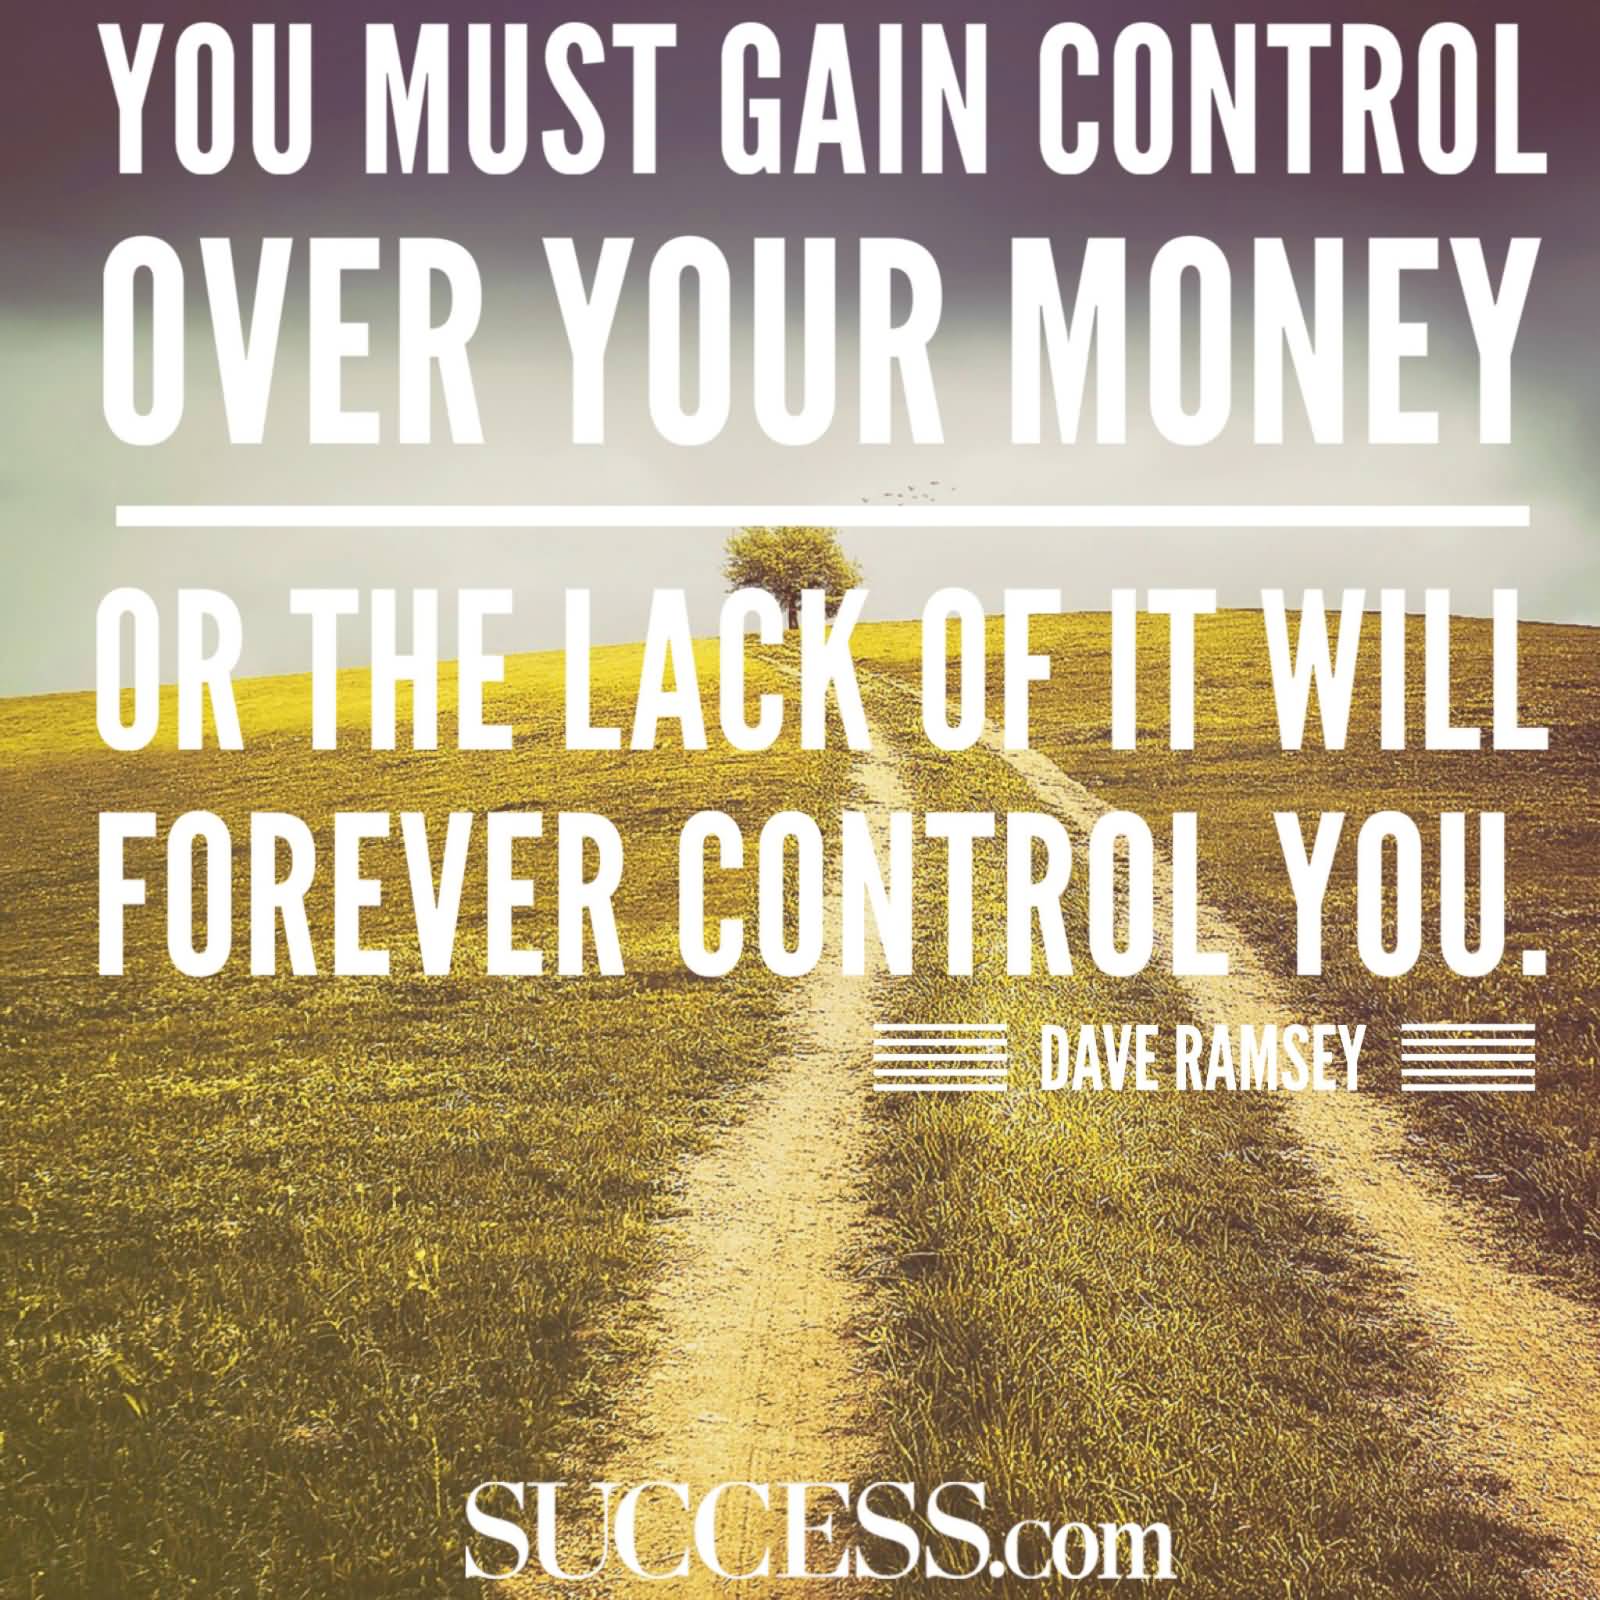 You must gain control over your money or the lack of it will forever control you. Dave Ramsey